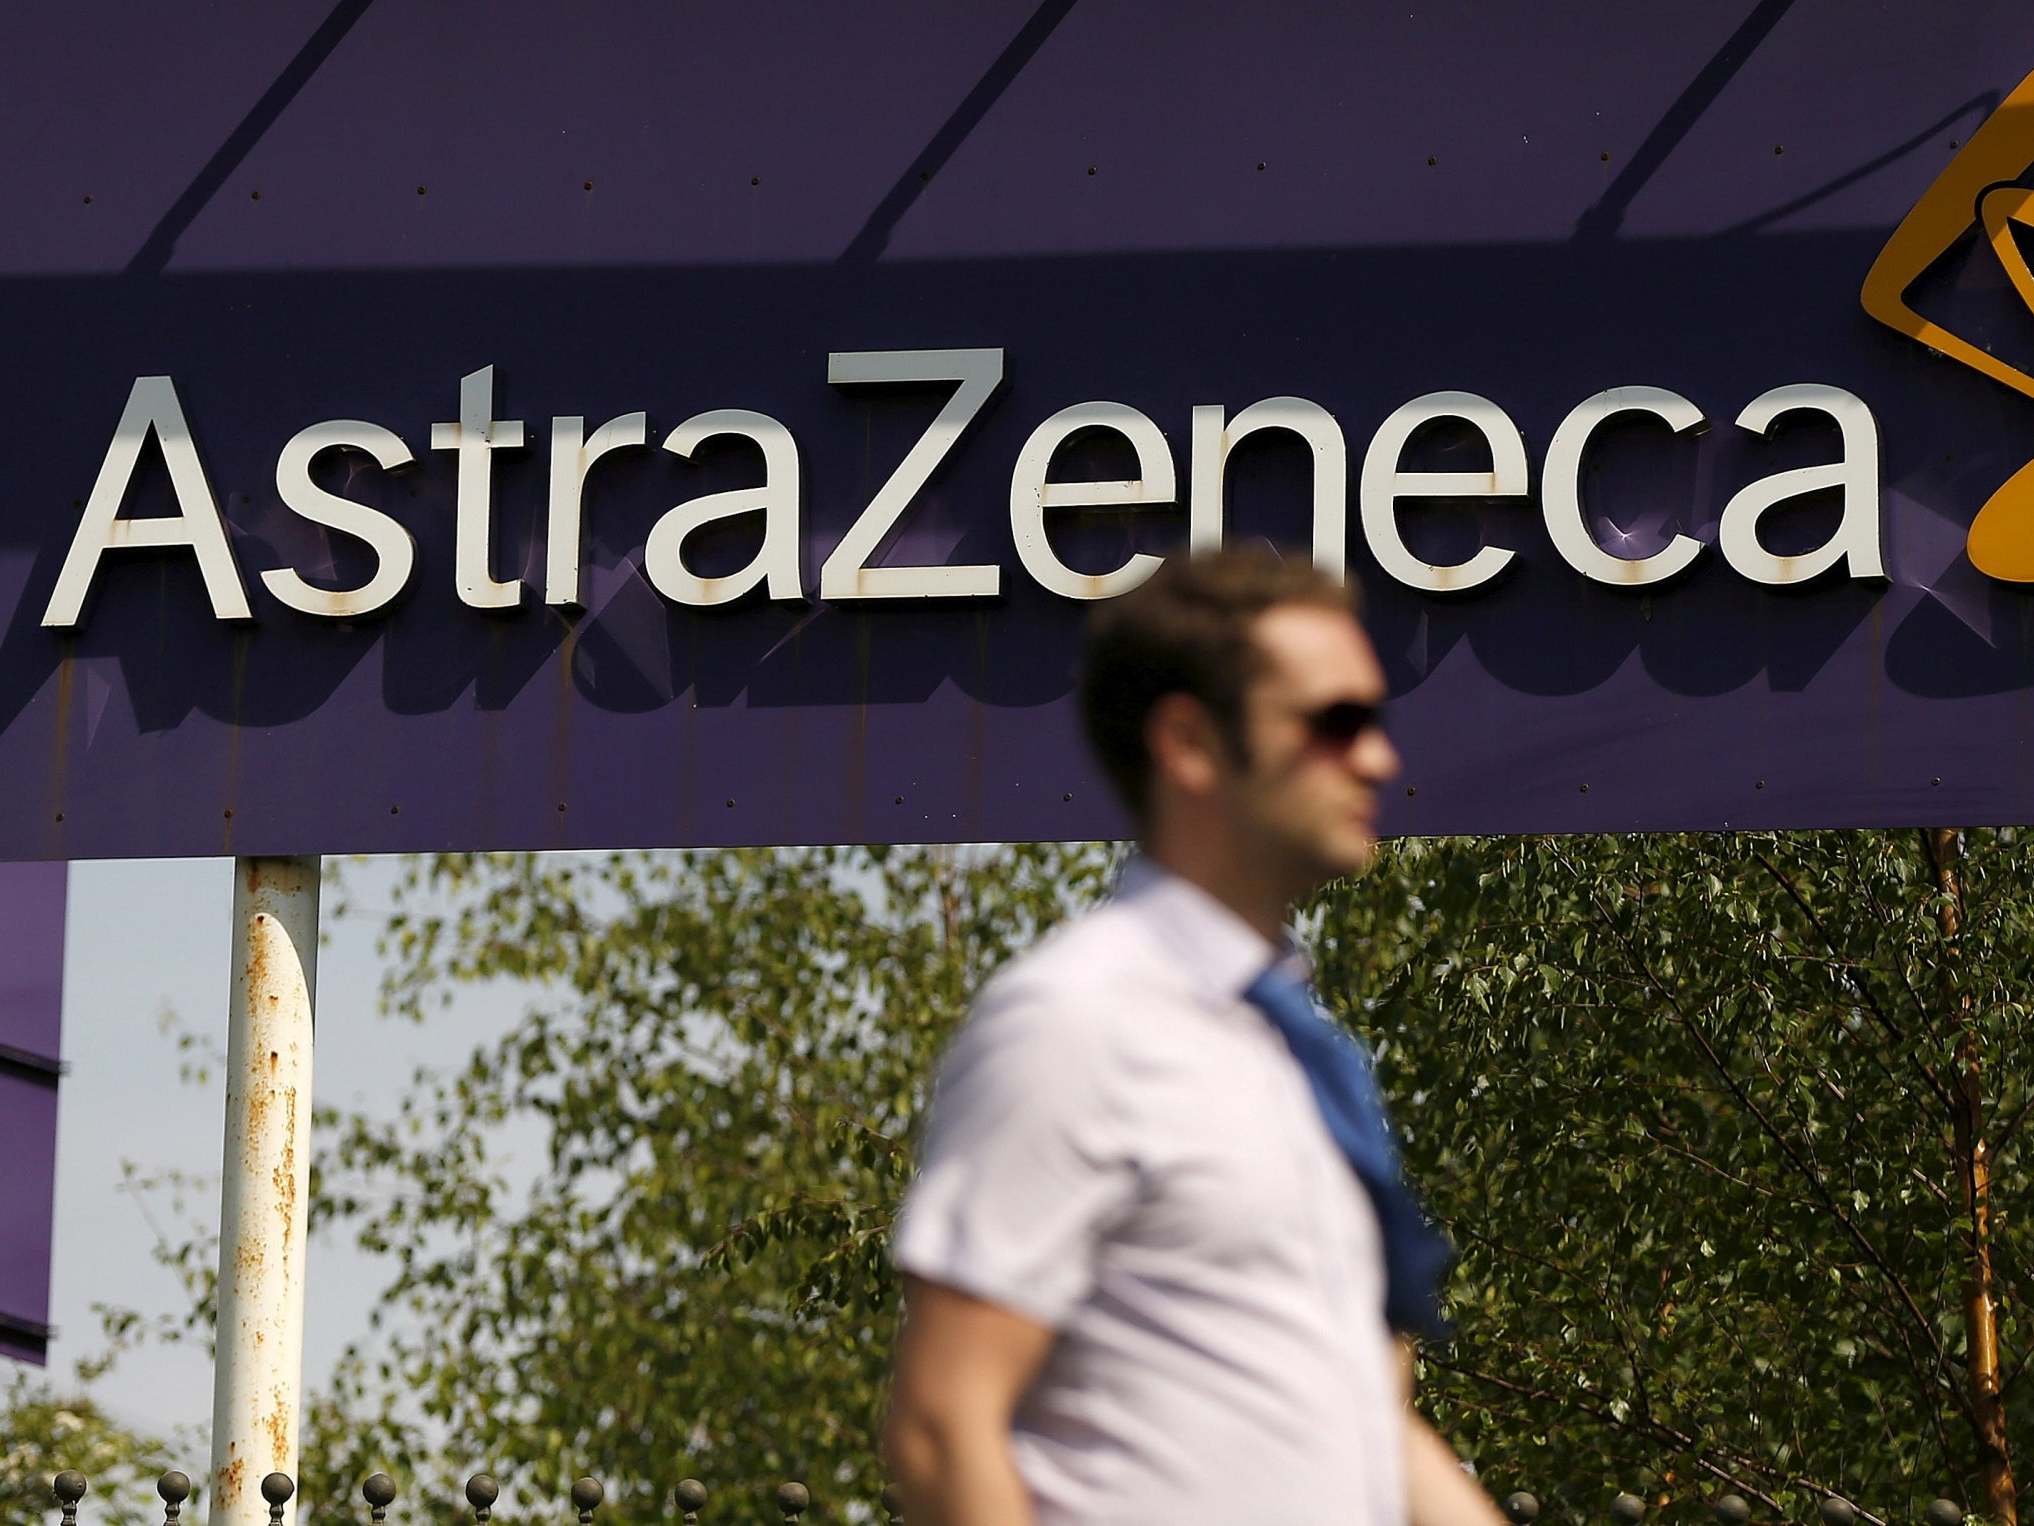 The drug company AstraZeneca has pledged to provide the potential coronavirus vaccine for no profit during the pandemic